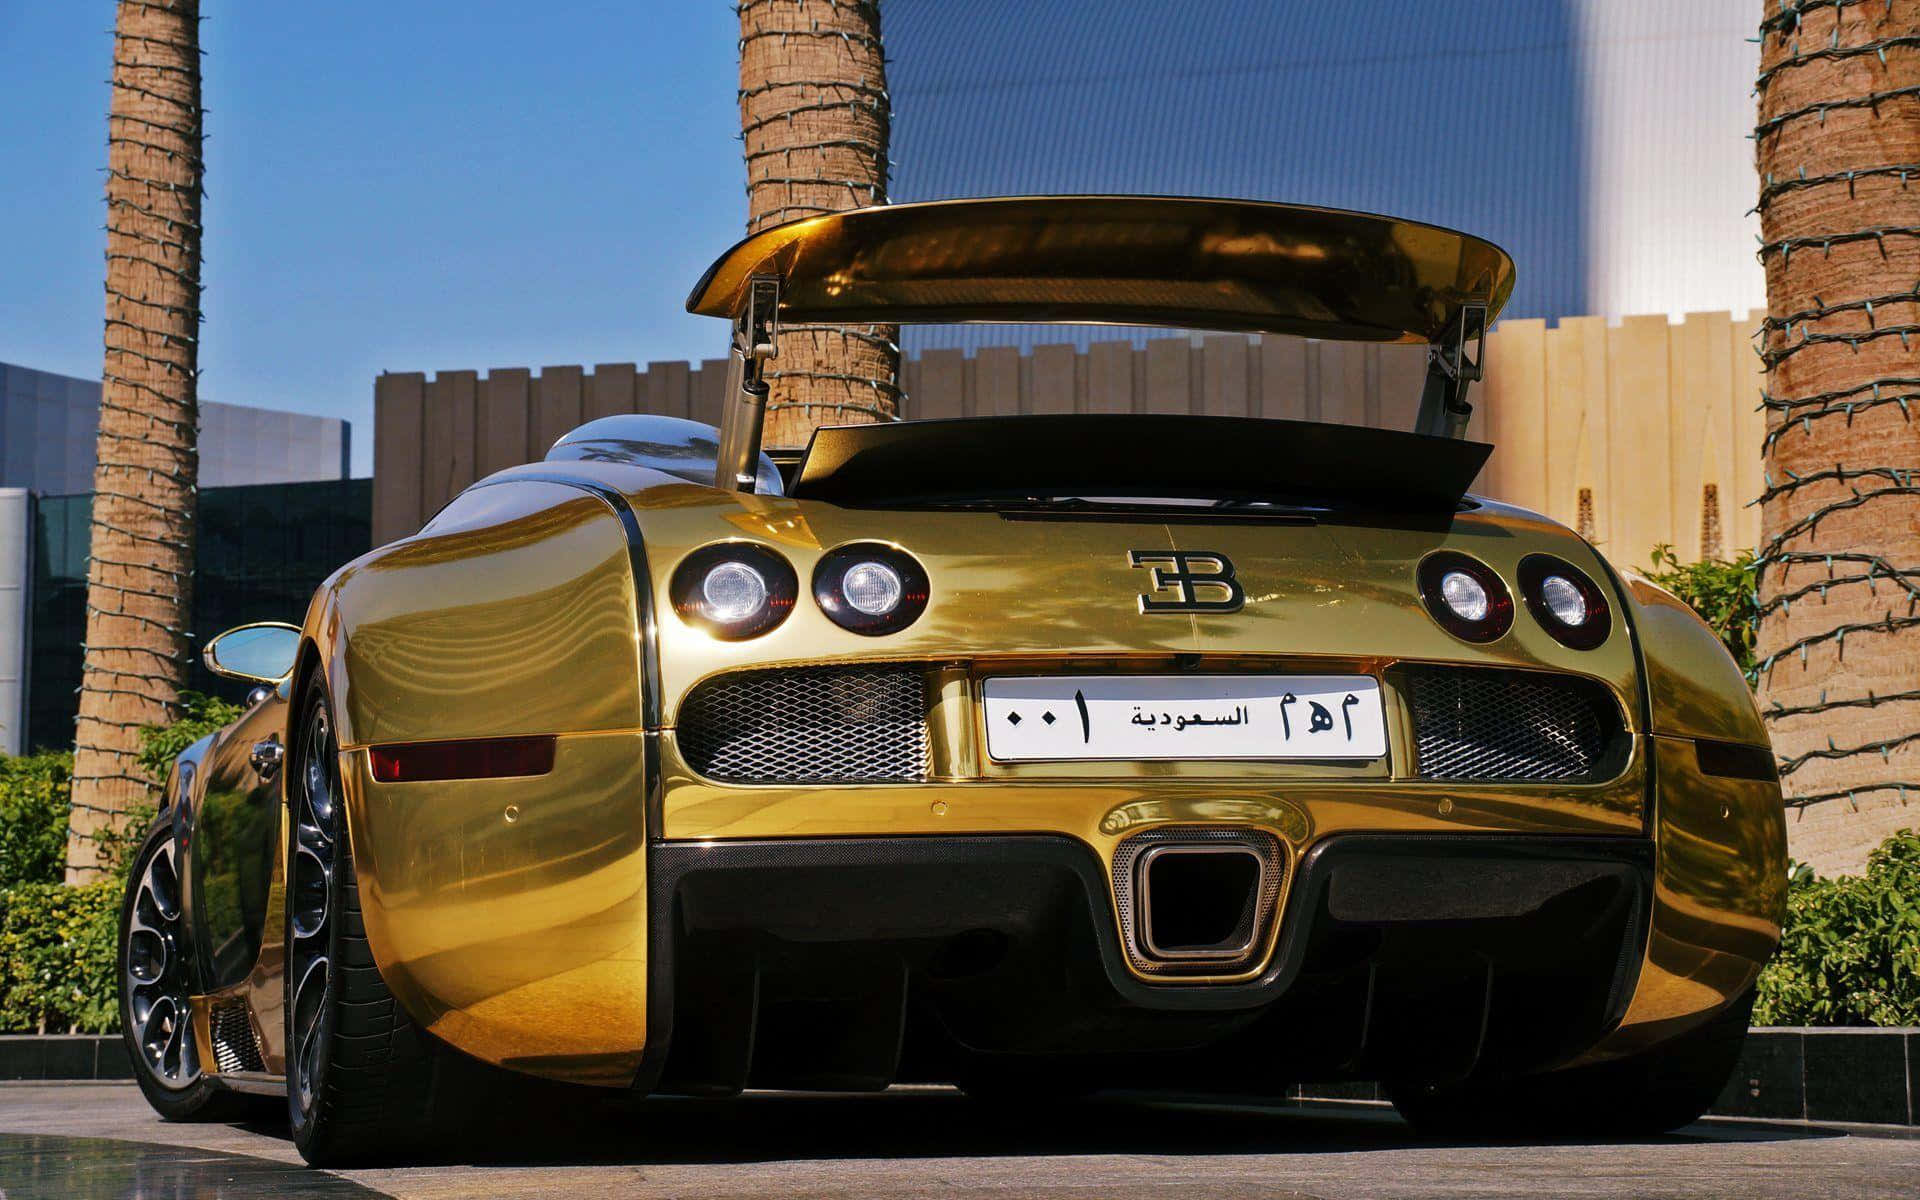 A Gold Bugatti Veyron Parked In Front Of Palm Trees Wallpaper